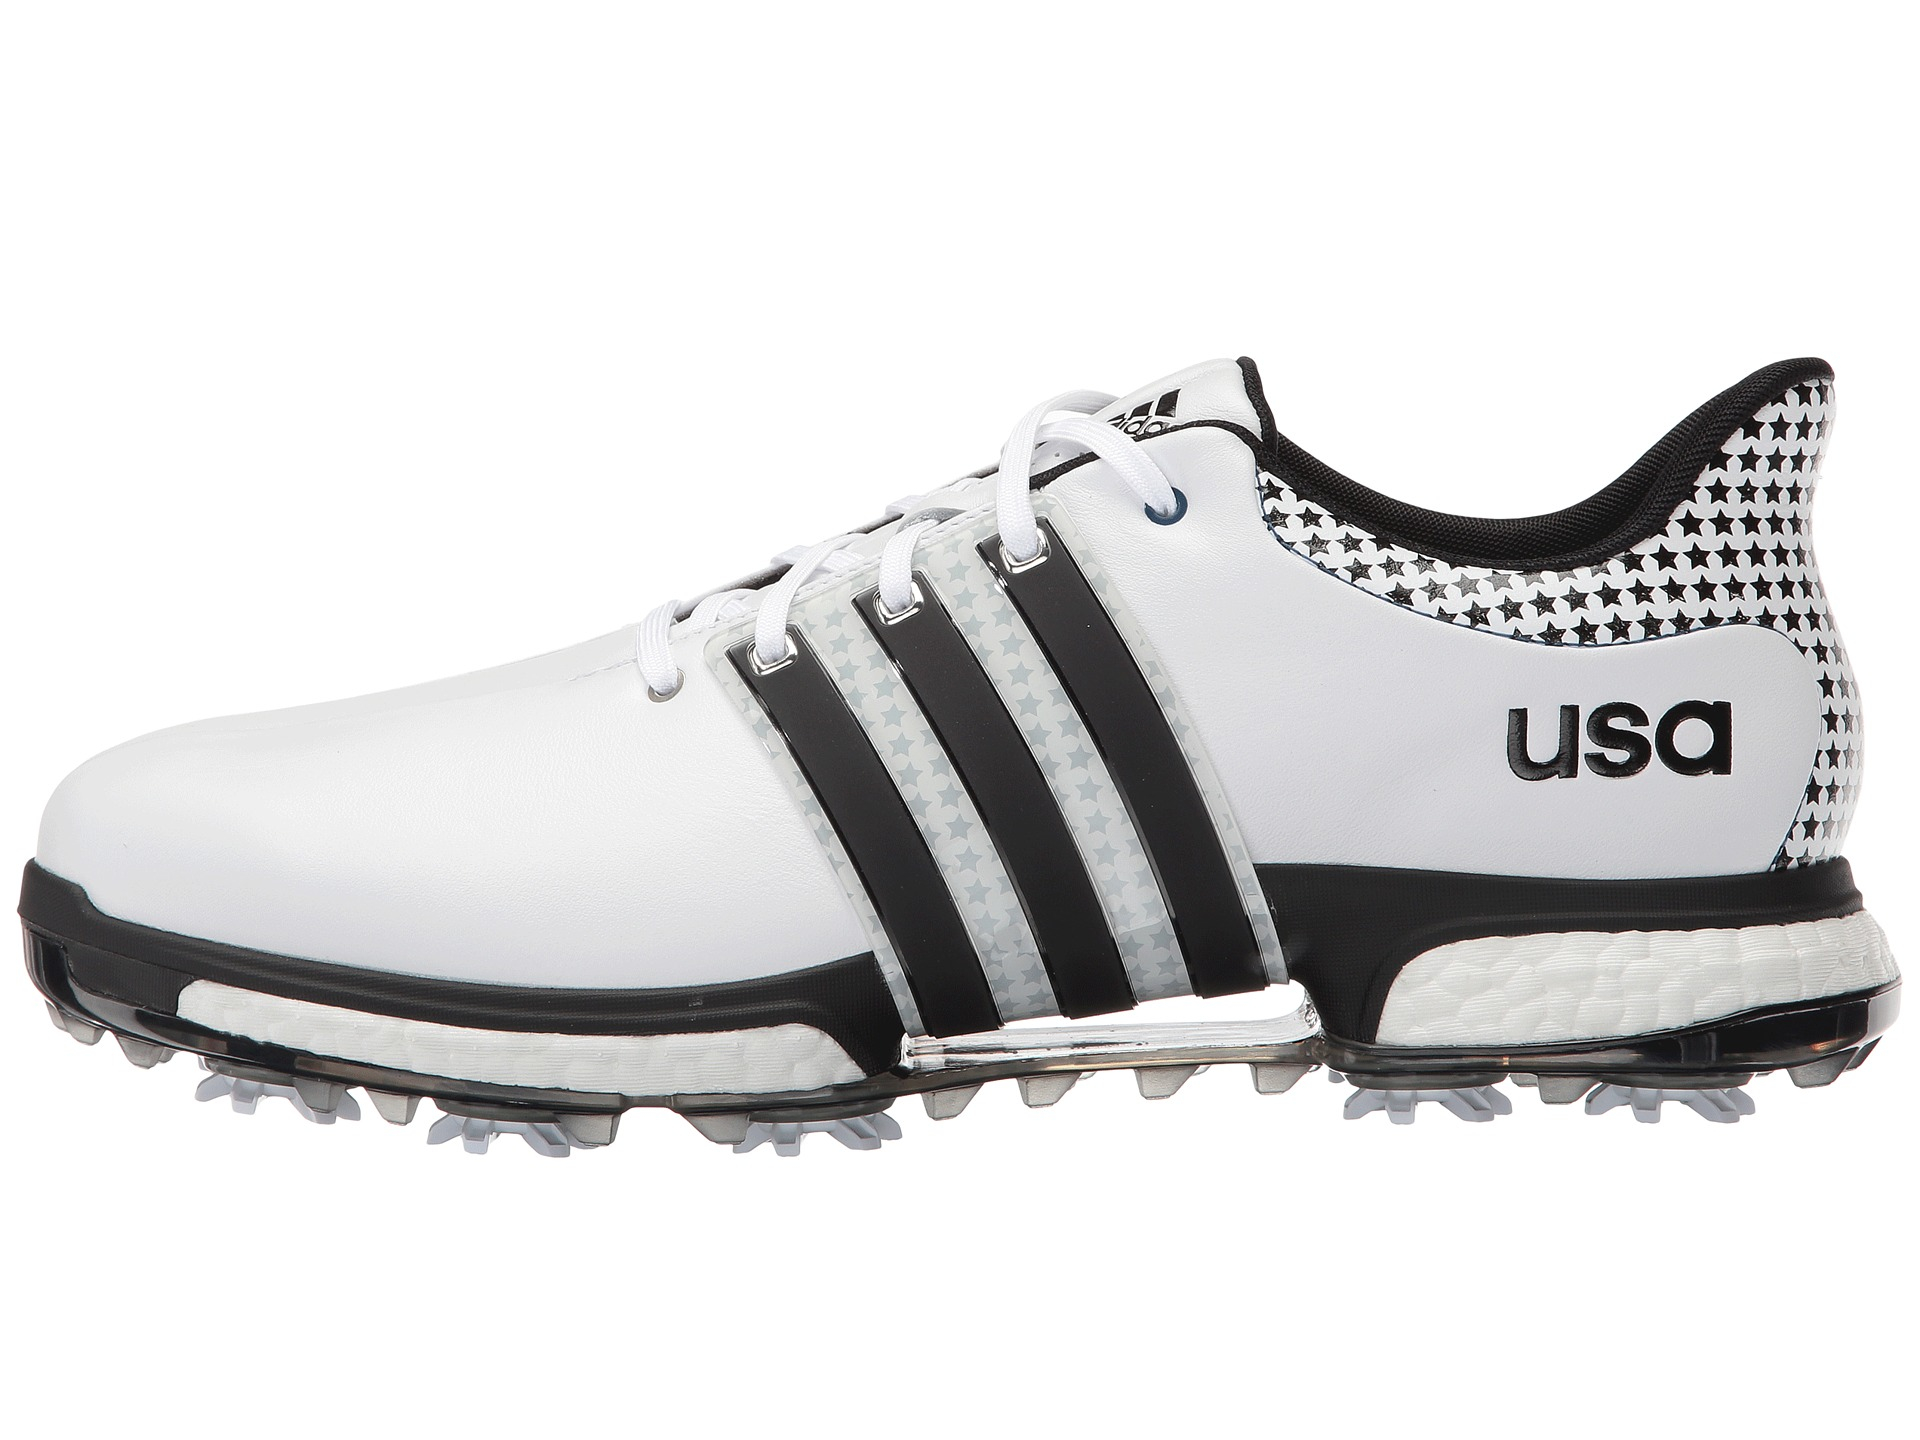 adidas Originals Leather Tour 360 Boost - Limited Edition Ryder Cup for Men  - Lyst